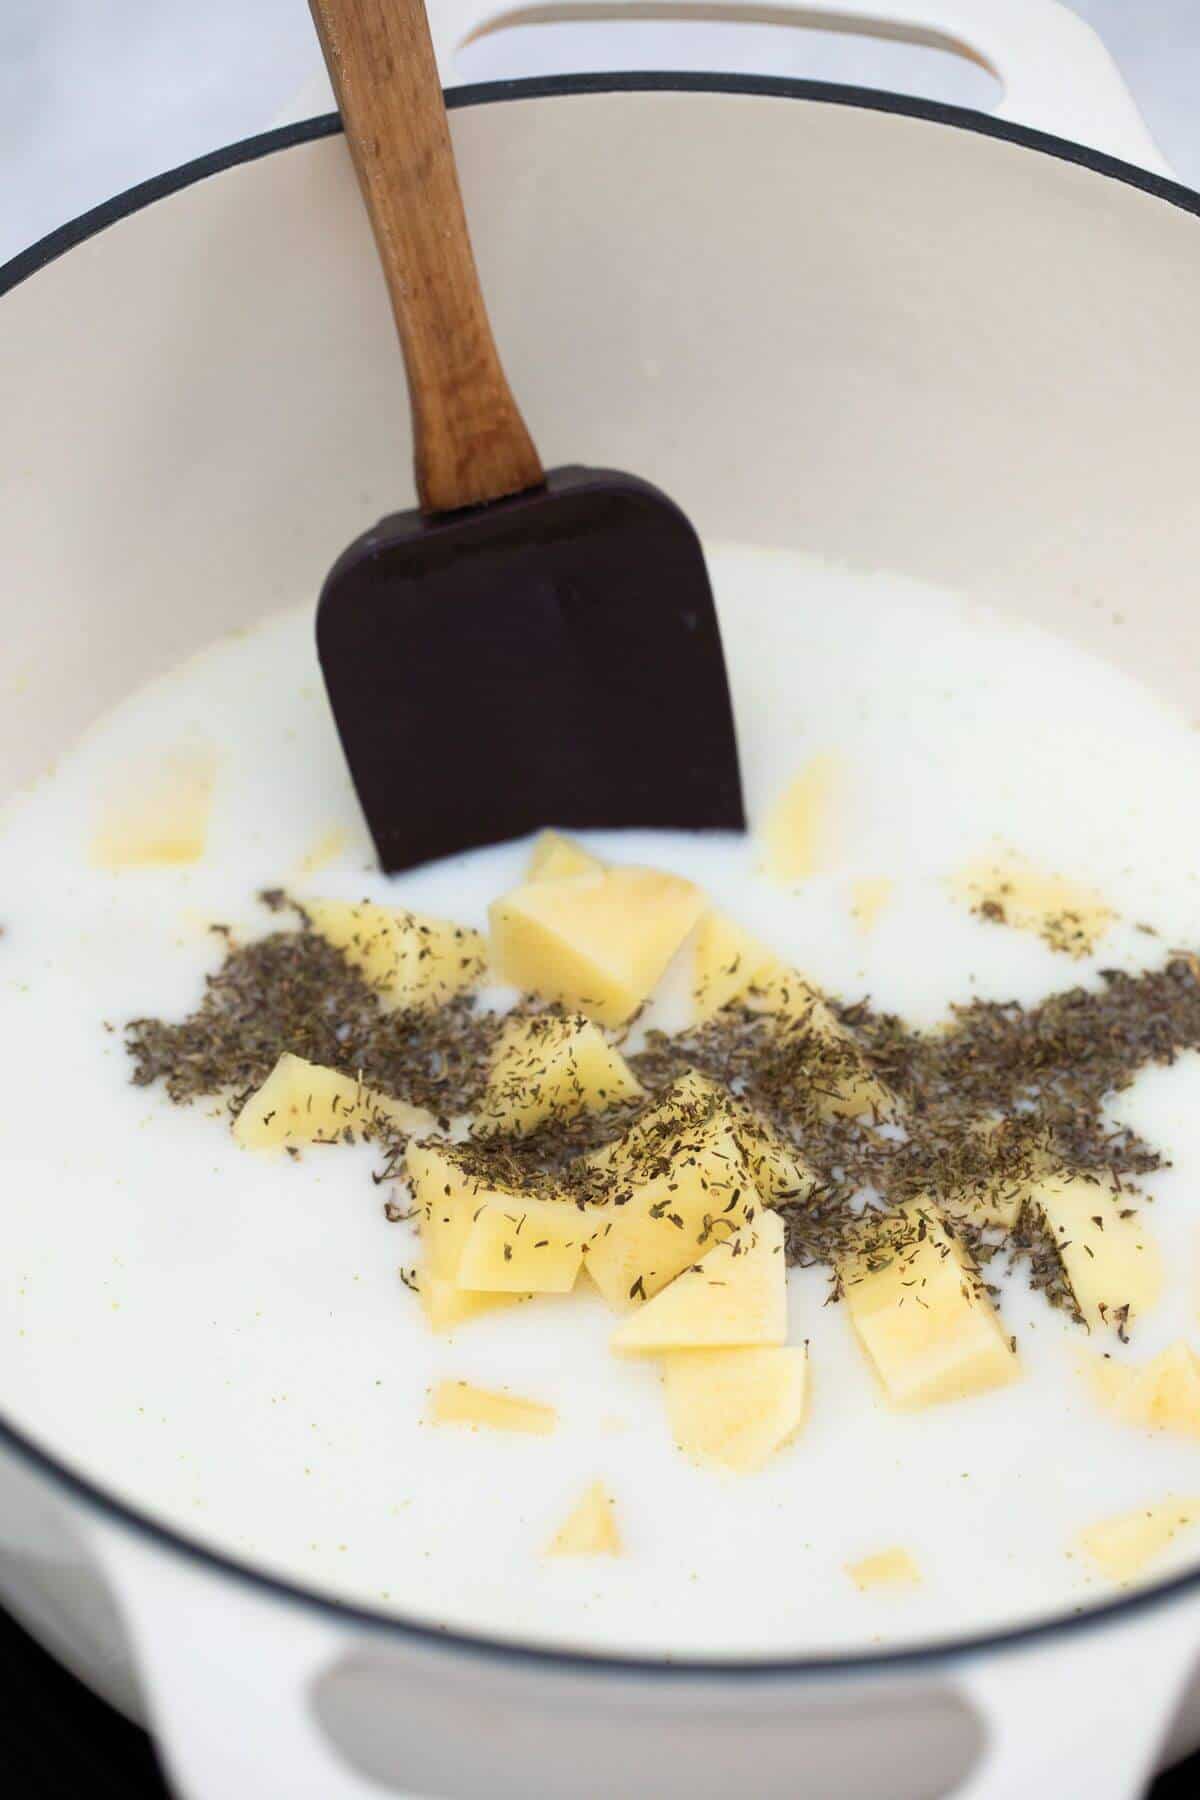 A pot of milk with spices and a wooden spoon.